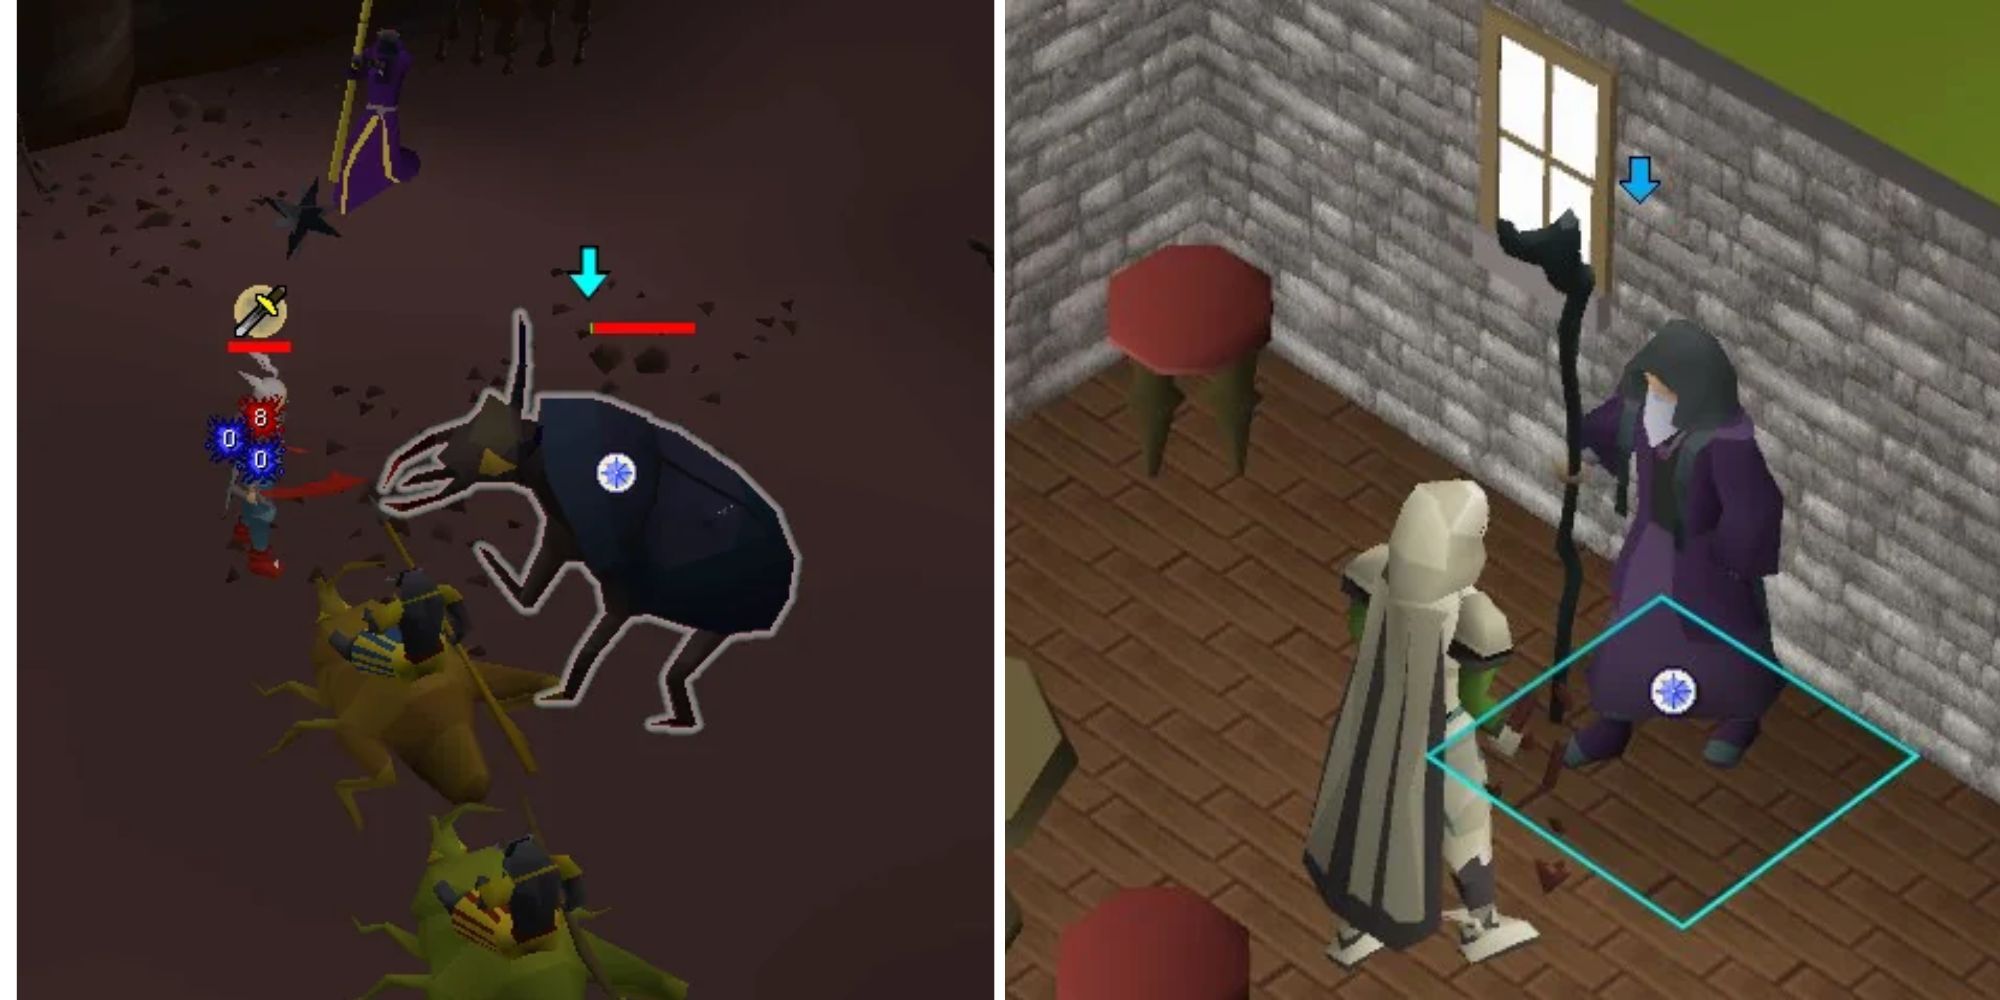 A split image of two different quests being completed, with the left showing an enemy that needs to be slain, and the right showing an NPC that needs to be talked to.